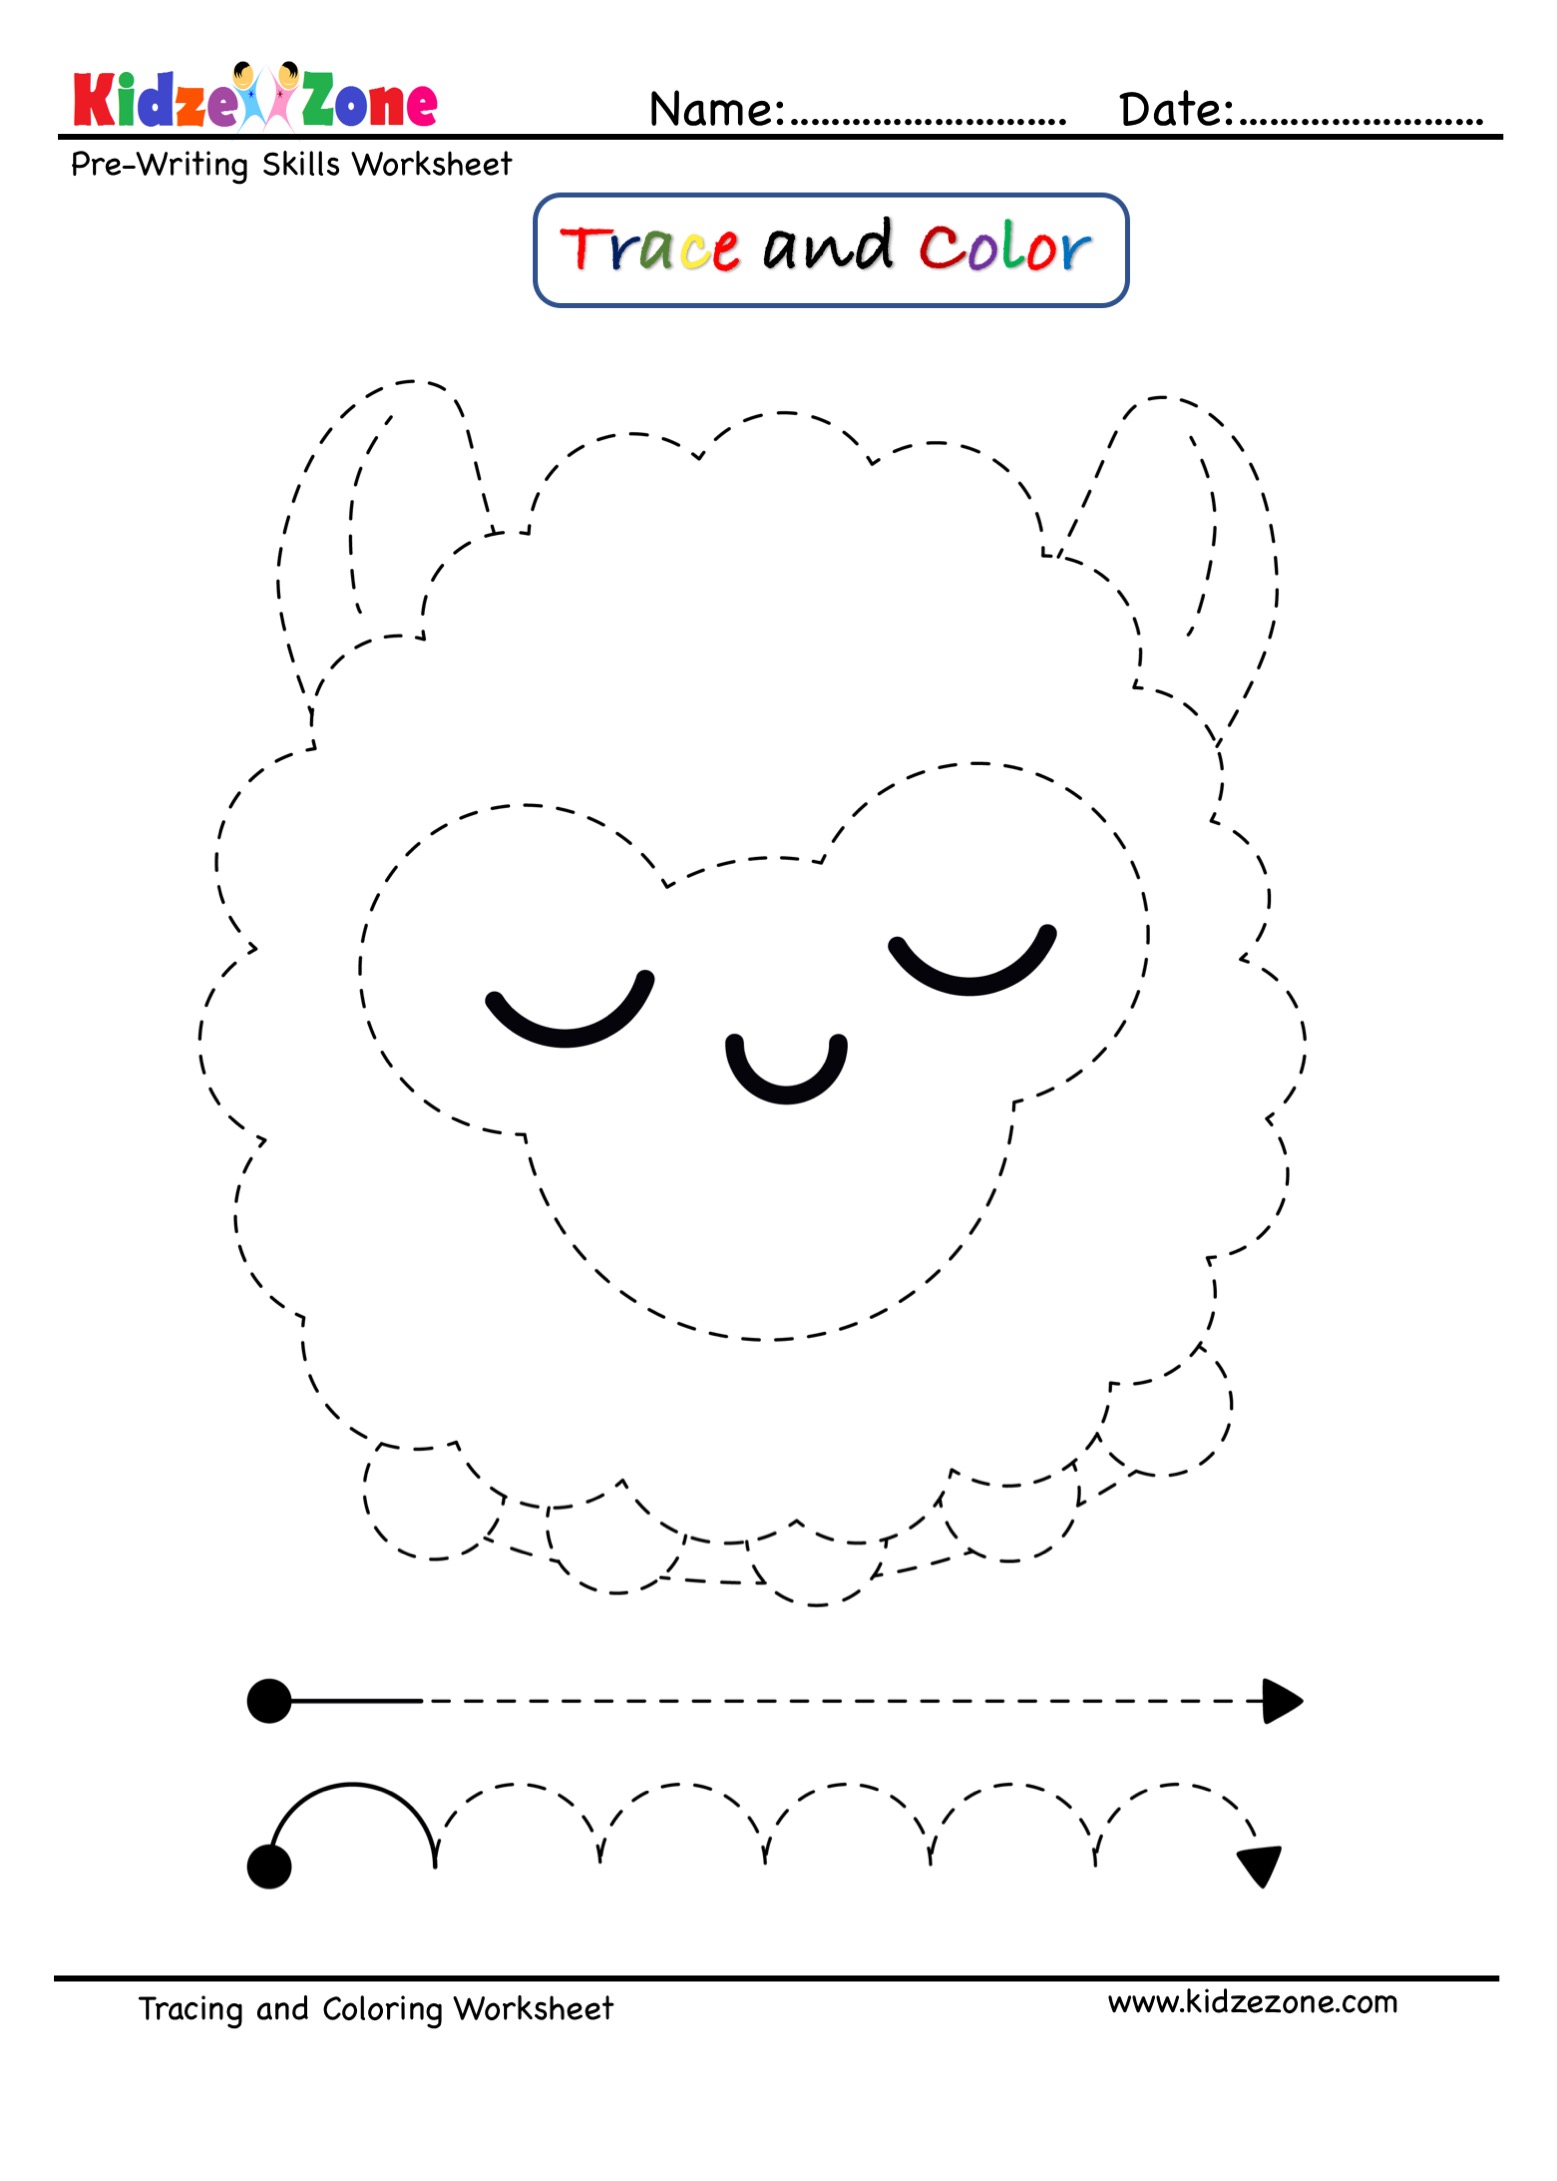 Premium Vector  Tracing practice worksheet for kids. trace and